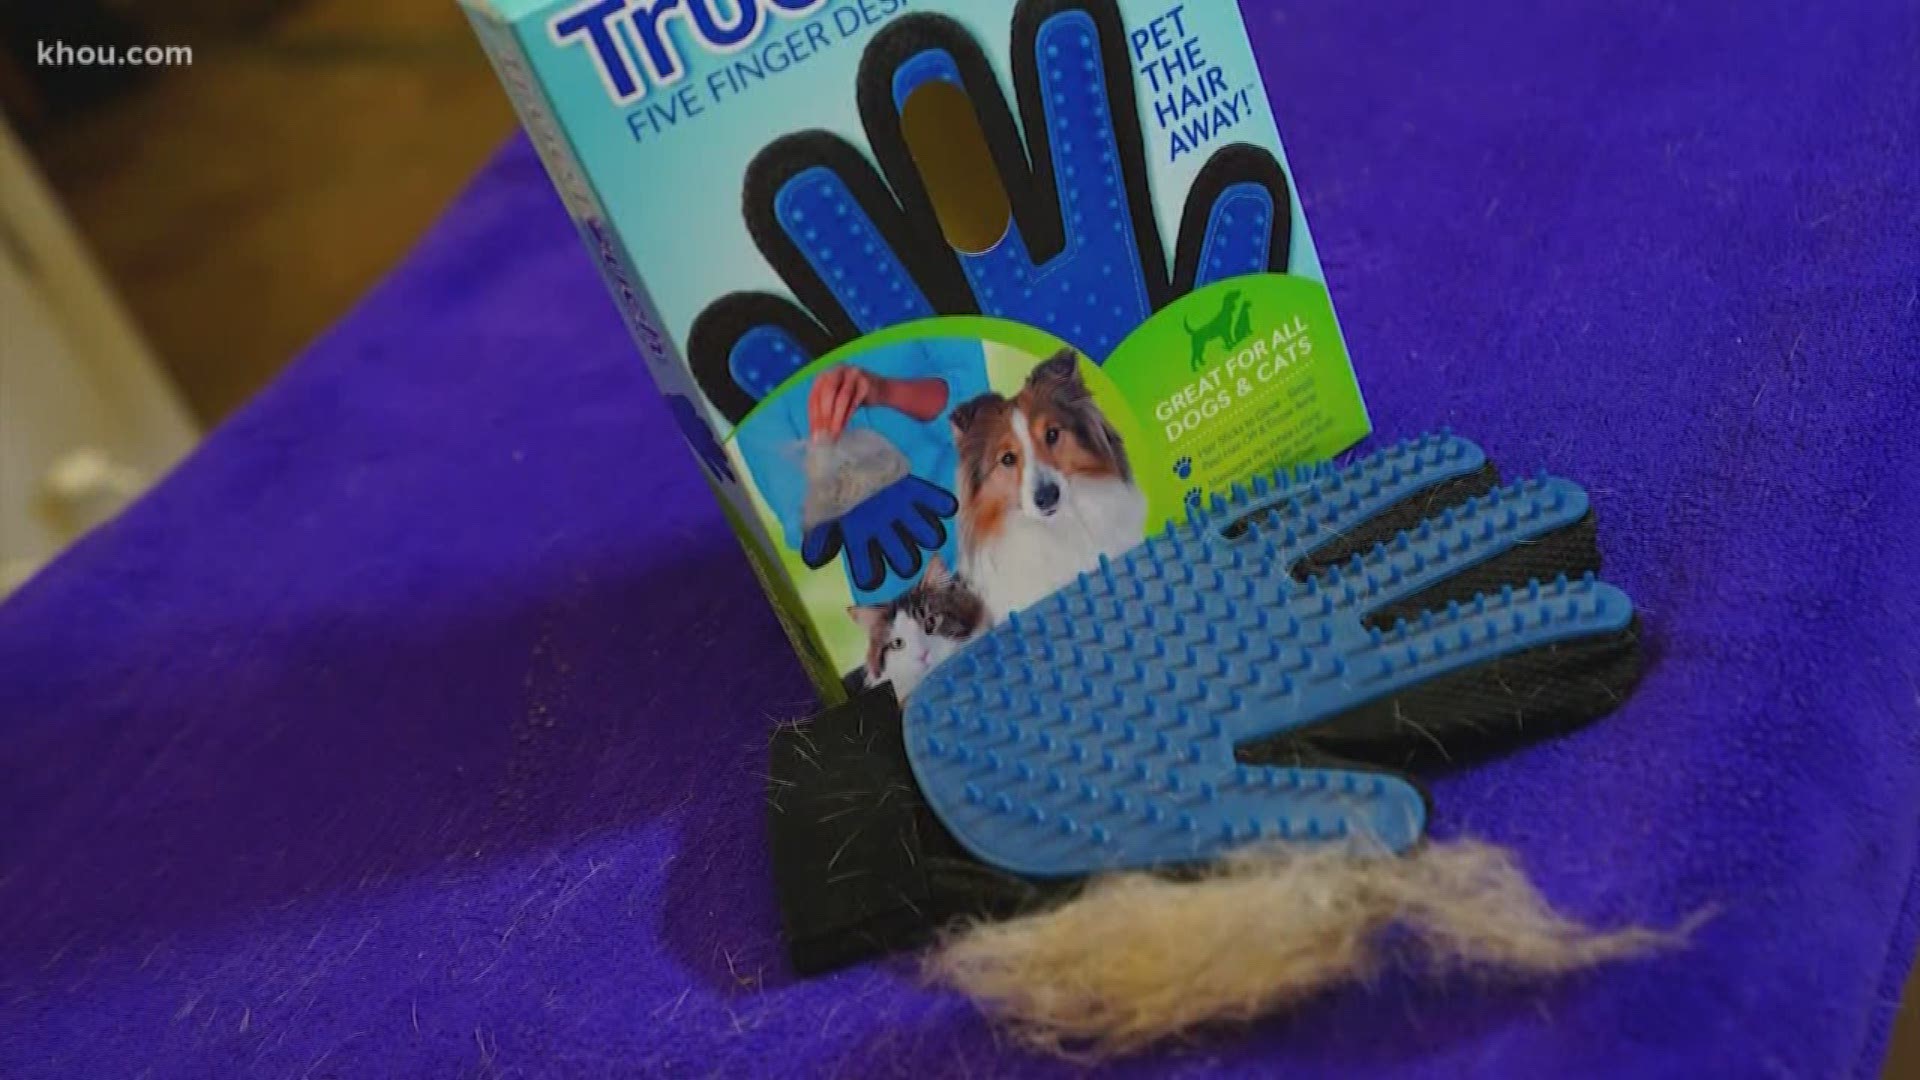 A pet owner asked us to try the True Touch five finger de-shedding glove. We tested it on two dogs at the Harris County Animal shelter in honor of National Adopt-A-Shelter-Dog month.